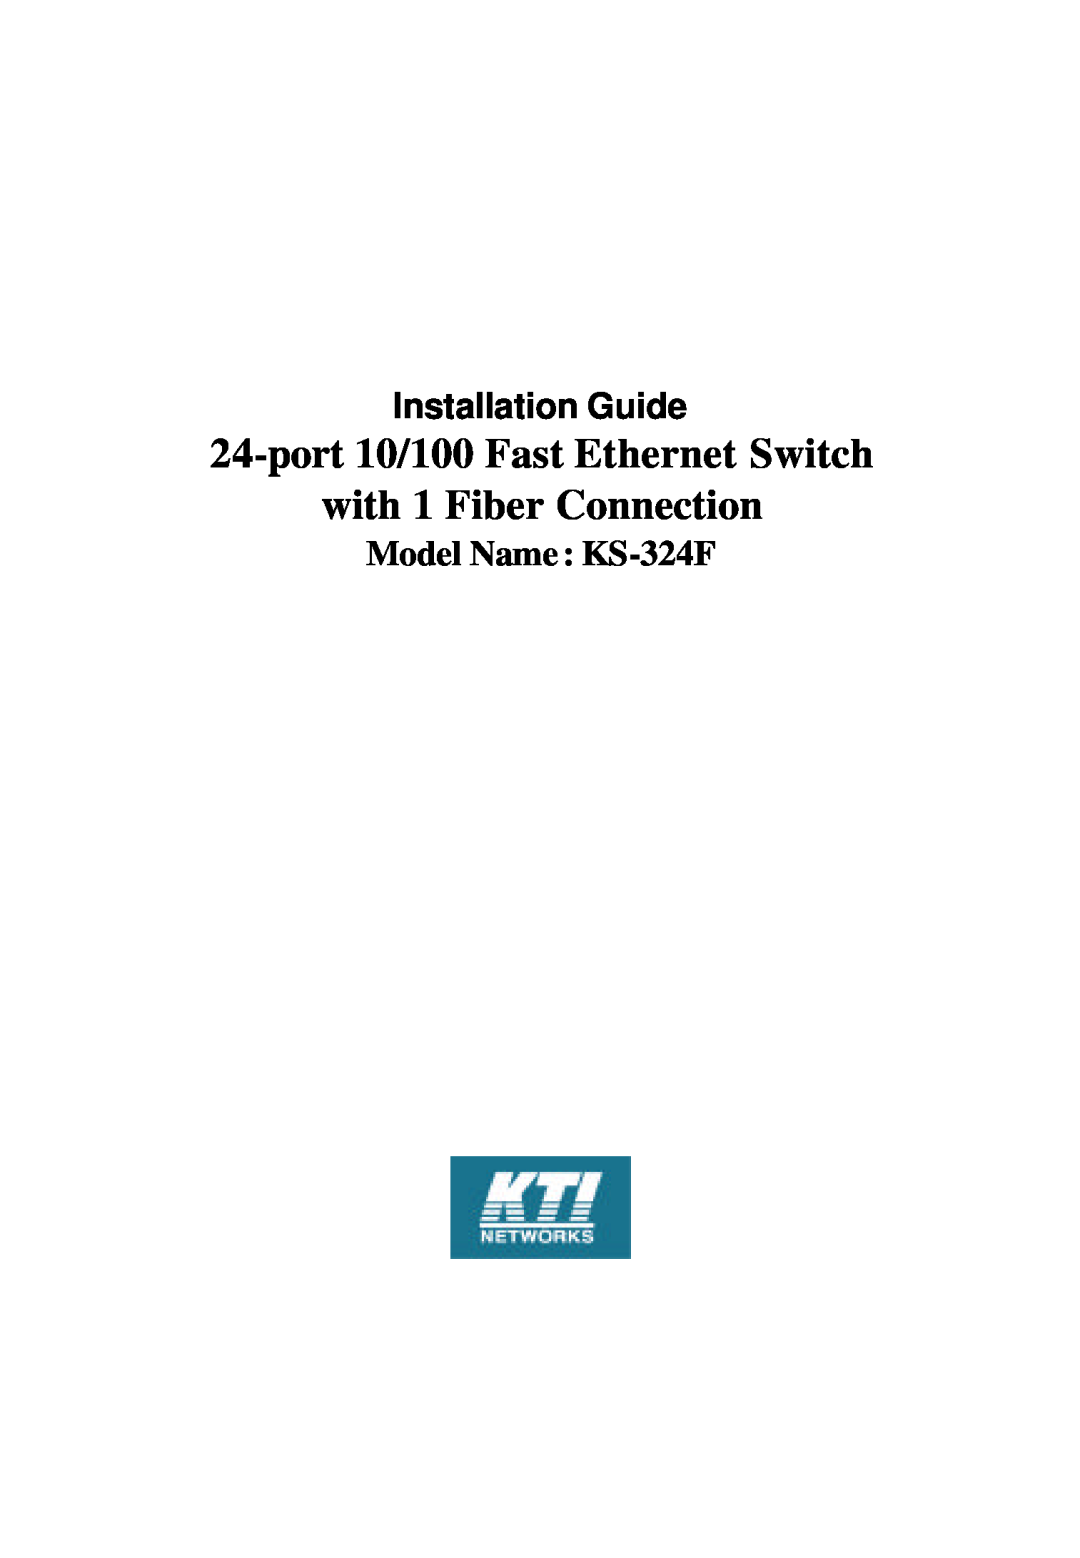 KTI Networks manual Model Name KS-324F, port 10/100 Fast Ethernet Switch with 1 Fiber Connection, Installation Guide 